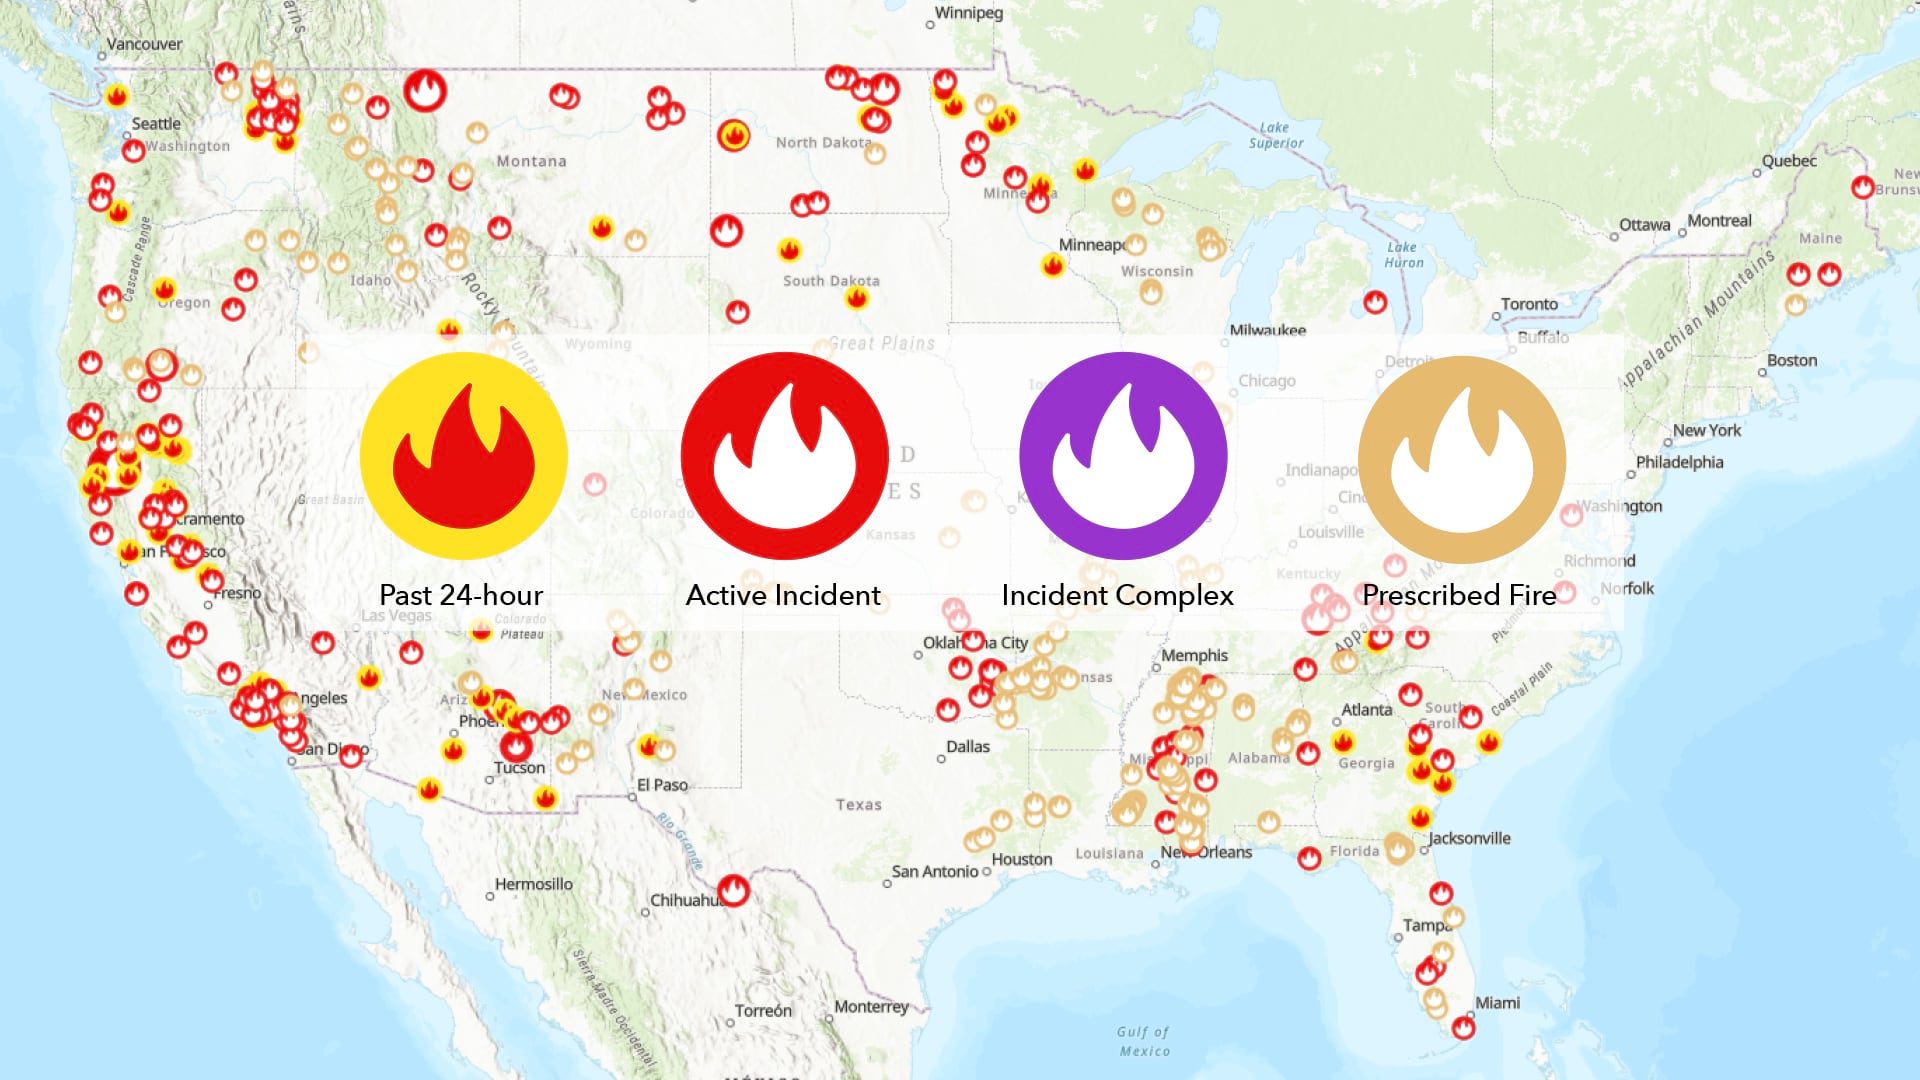 Wildfire Map Of The Usa